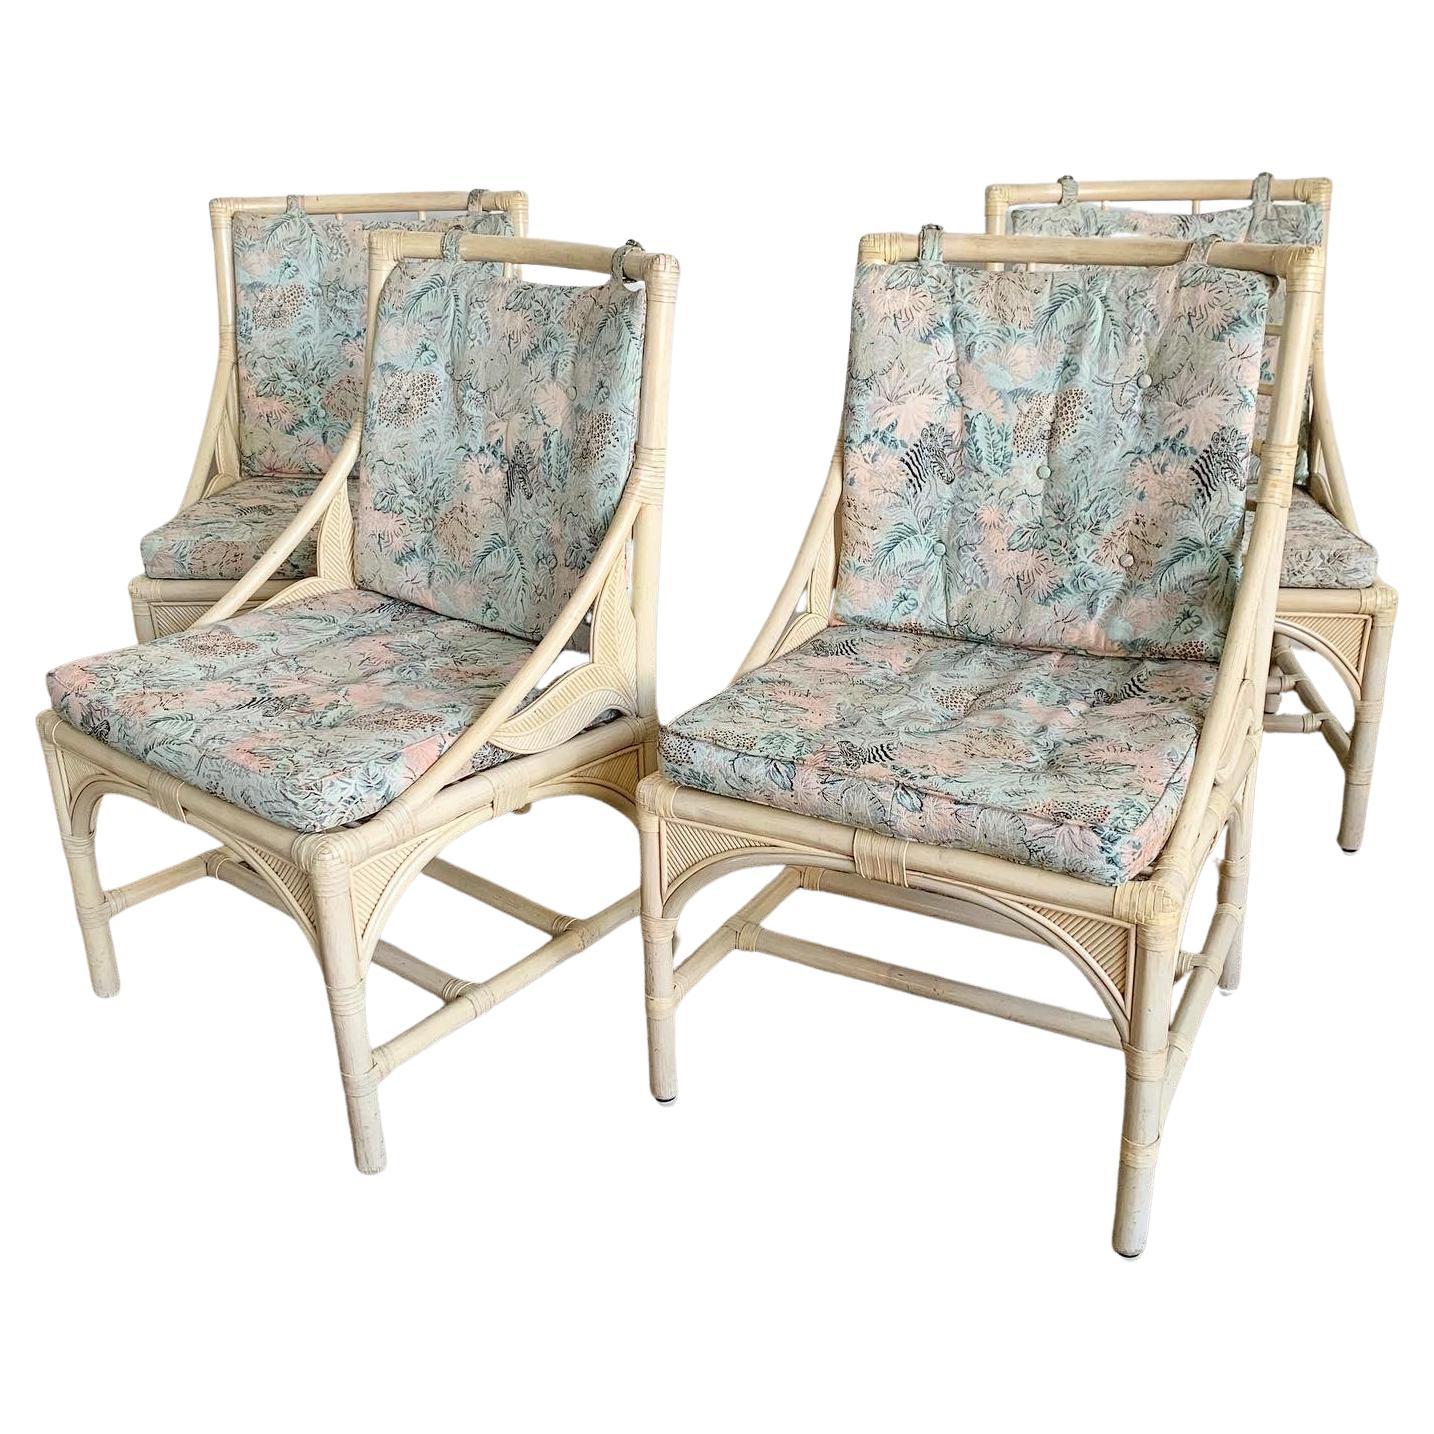 Experience the Boho Chic Bamboo Rattan Sculpted Pencil Reed Dining Chairs - Set of 4, blending natural materials, unique design, and relaxed sophistication.

Crafted with bamboo and rattan for a natural and organic feel.
Unique sculpted pencil reed